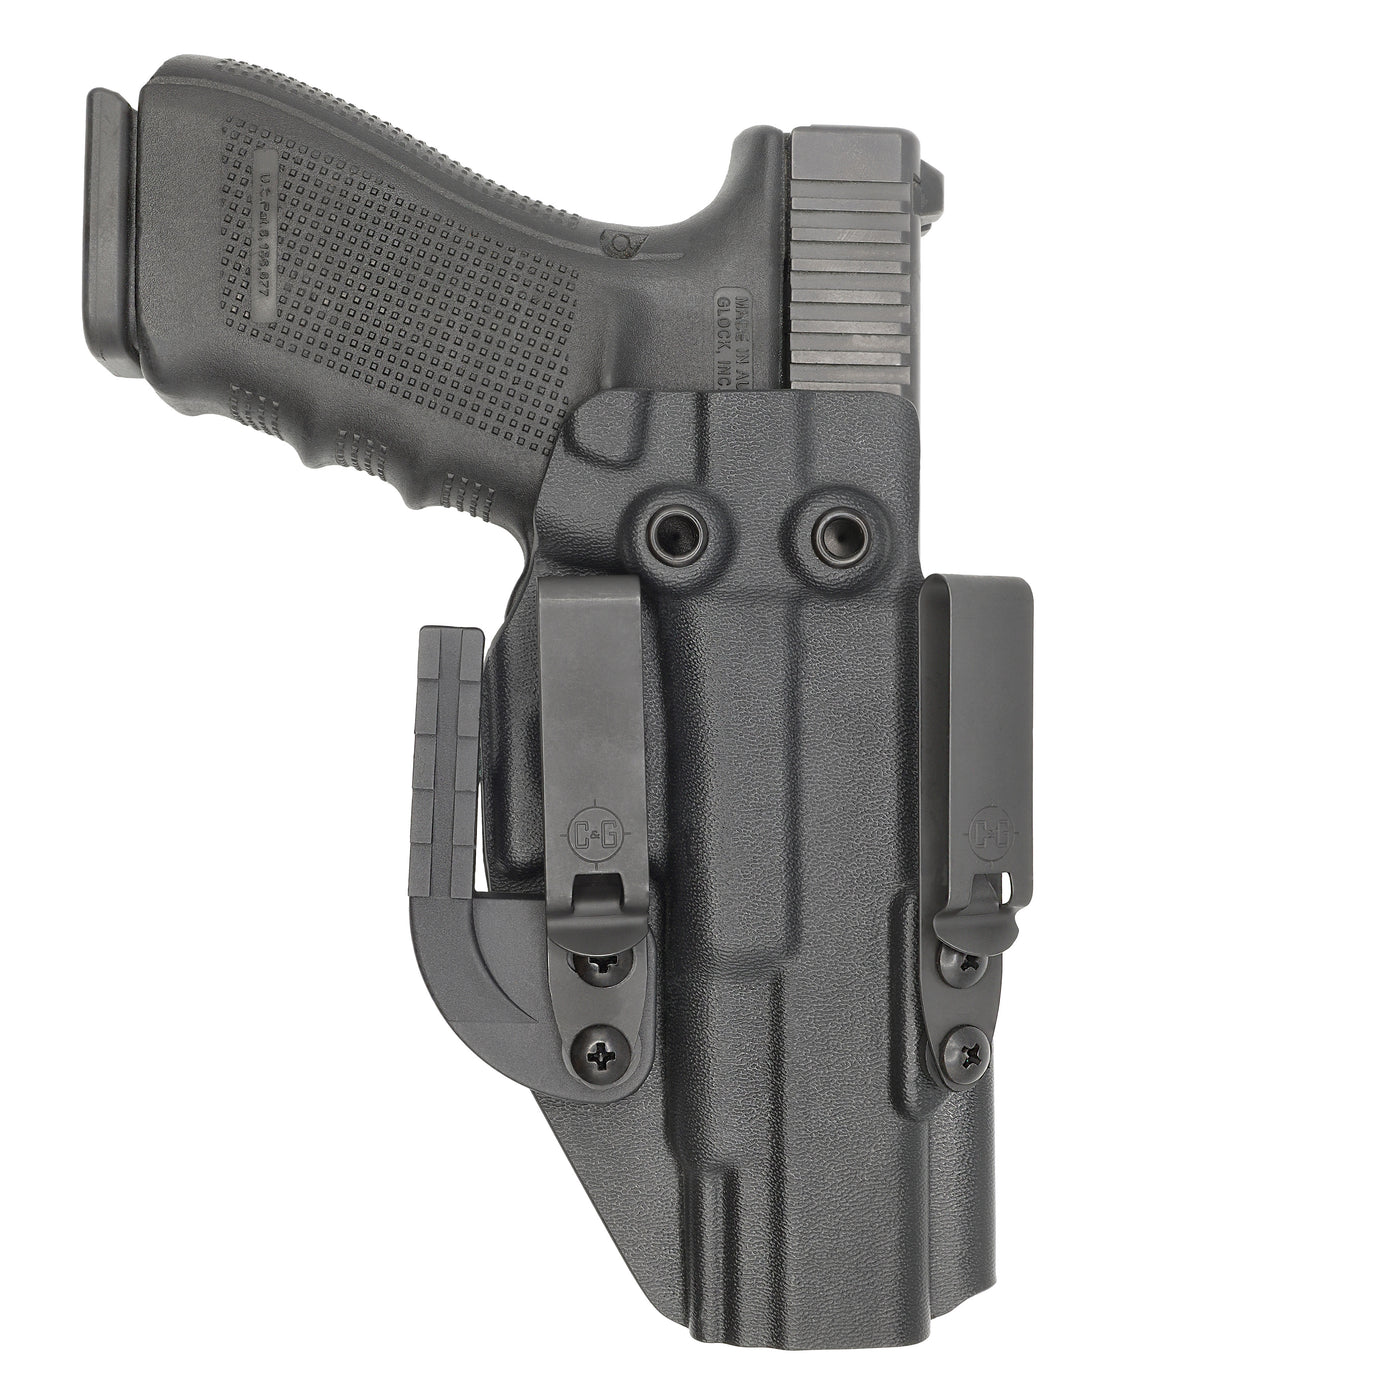 C&G Holsters Quickship IWB ALPHA UPGRADE Covert Glock 20/21 in holstered position